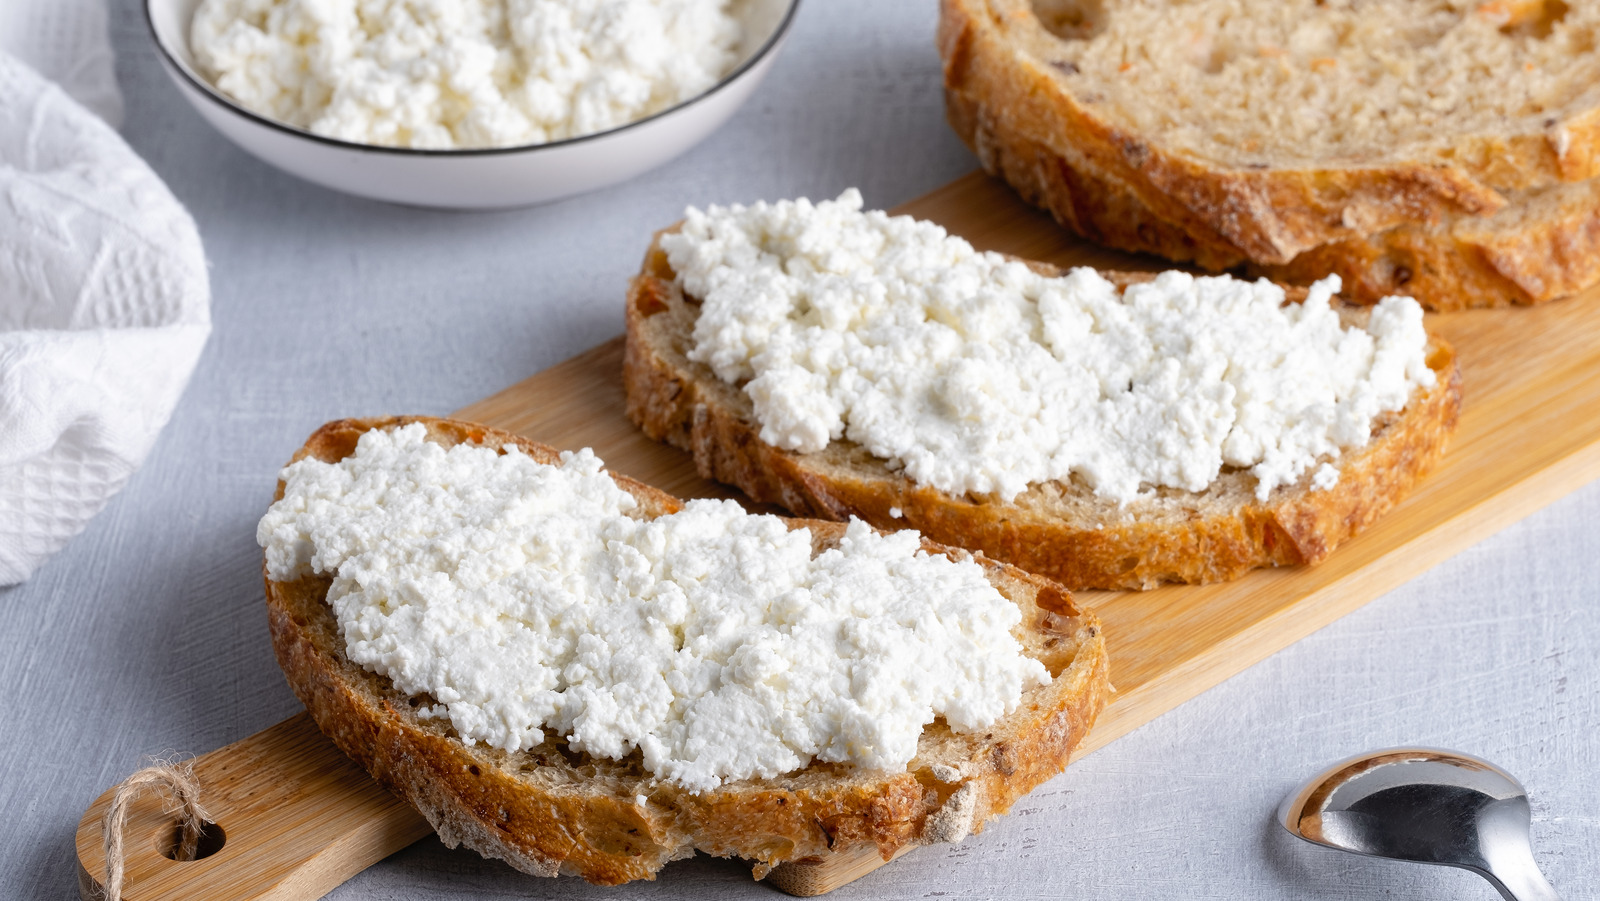 Cottage Cheese Is Making a Comeback—What to Know About This Trend